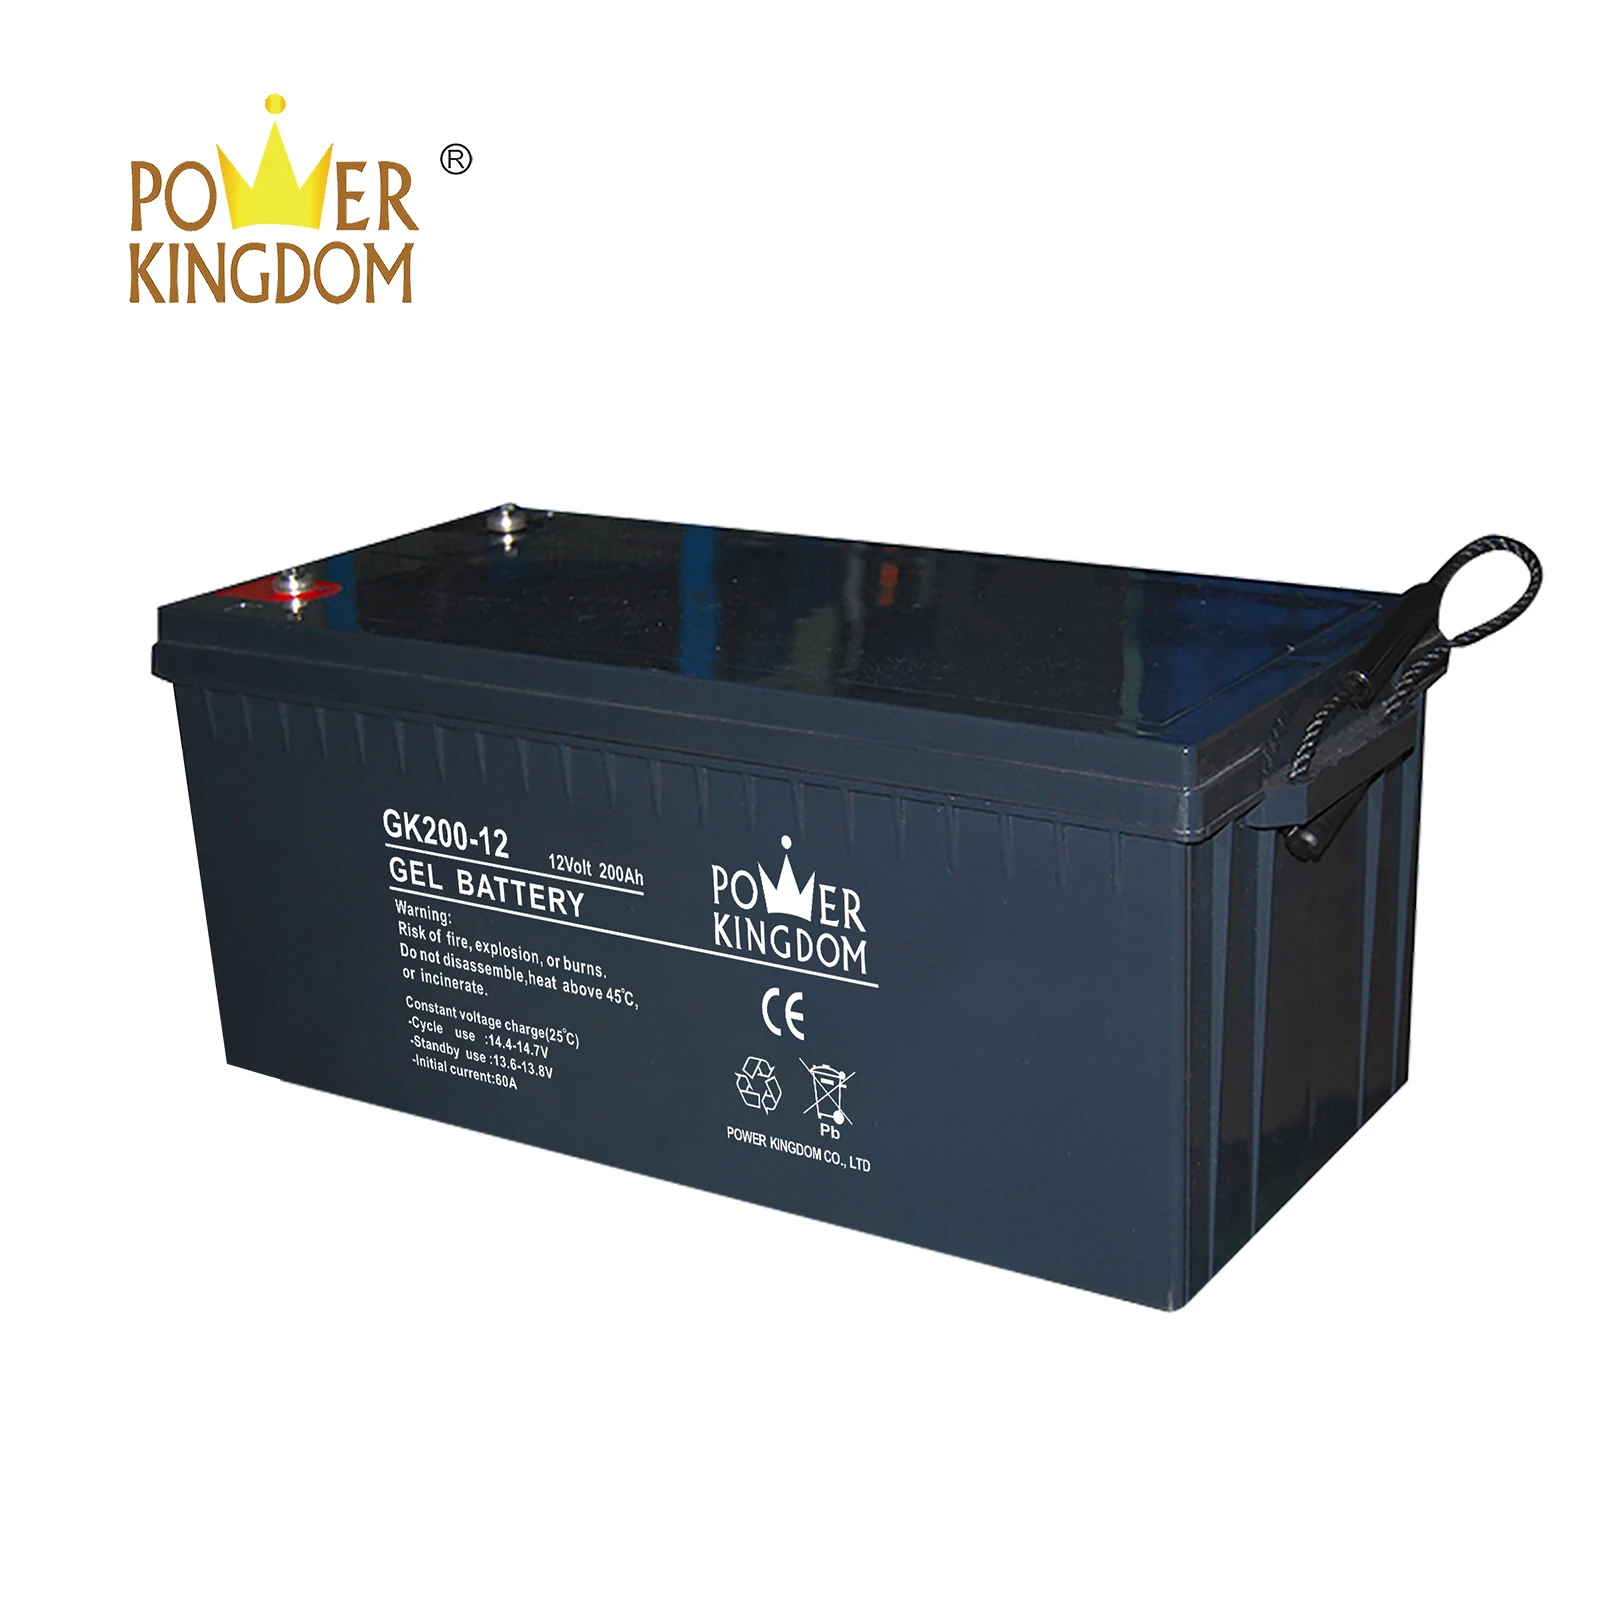 Power Kingdom rechargeable sealed lead acid battery factory medical equipment